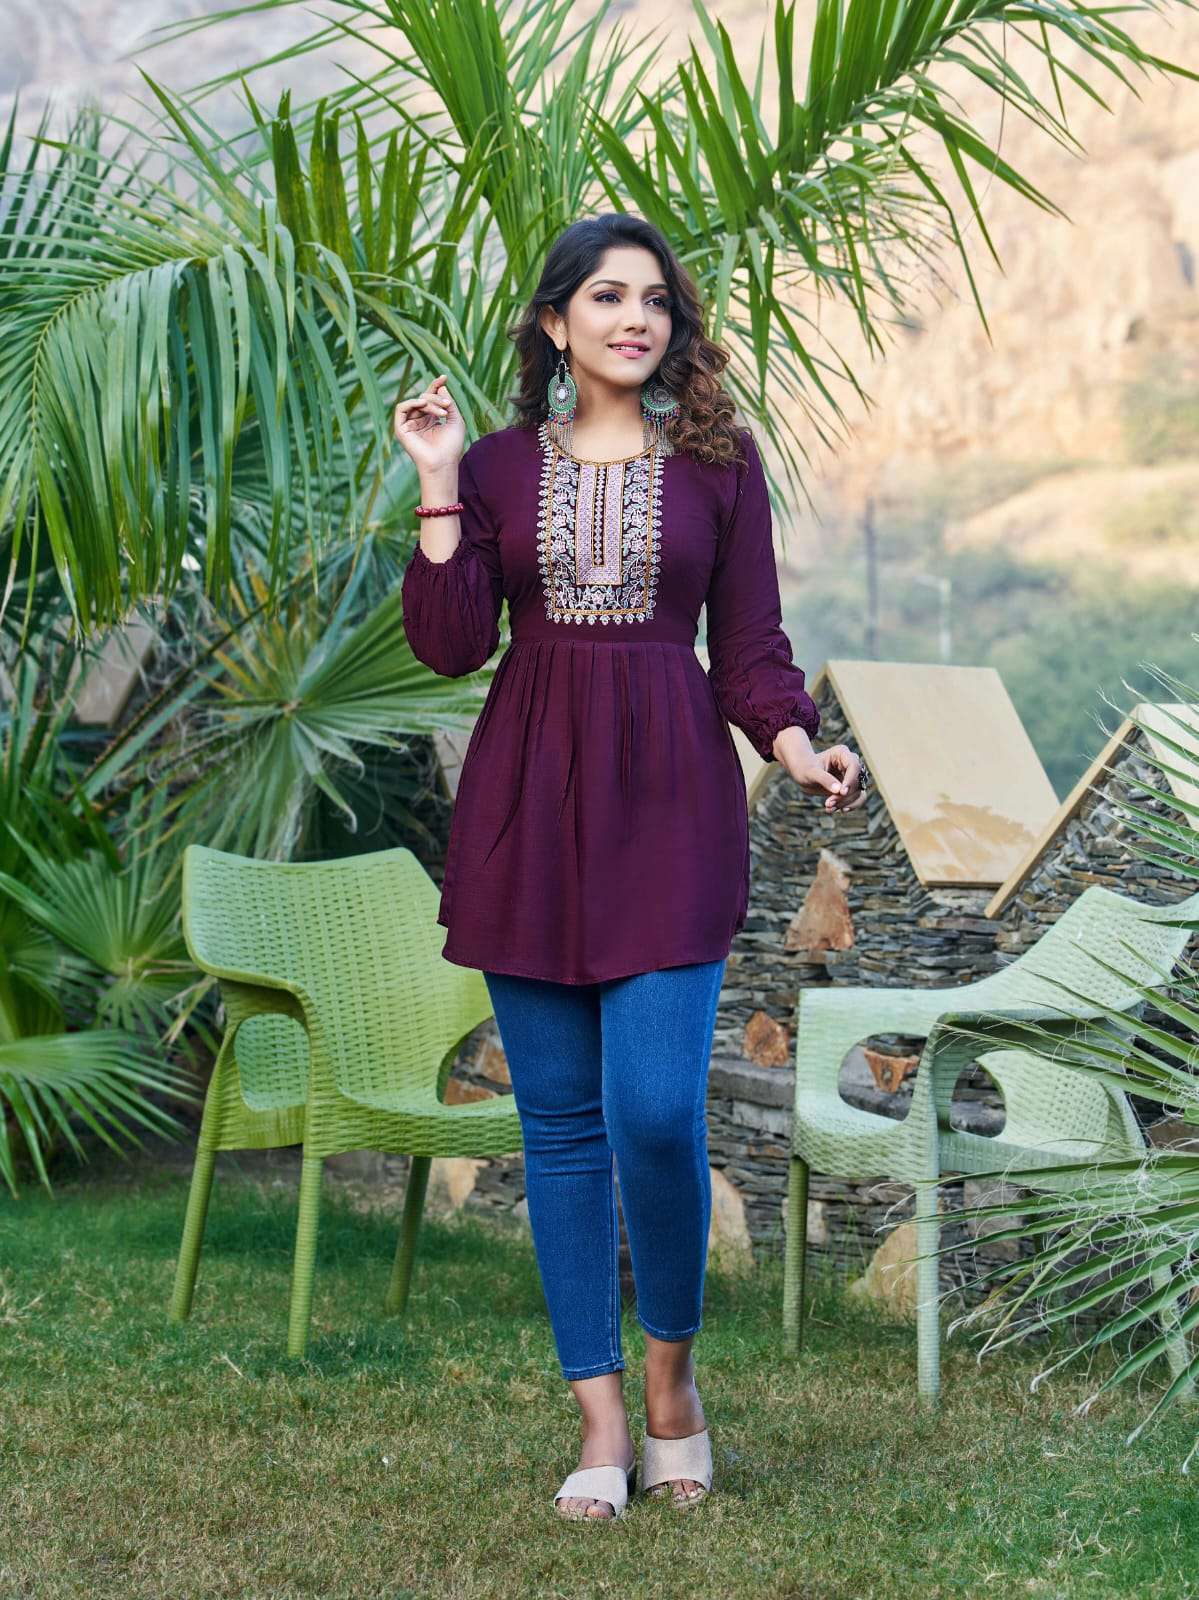 TIPS & TOPS Launching  Bubbly Vol 09 Fancy Western Shorty On Wholesale 